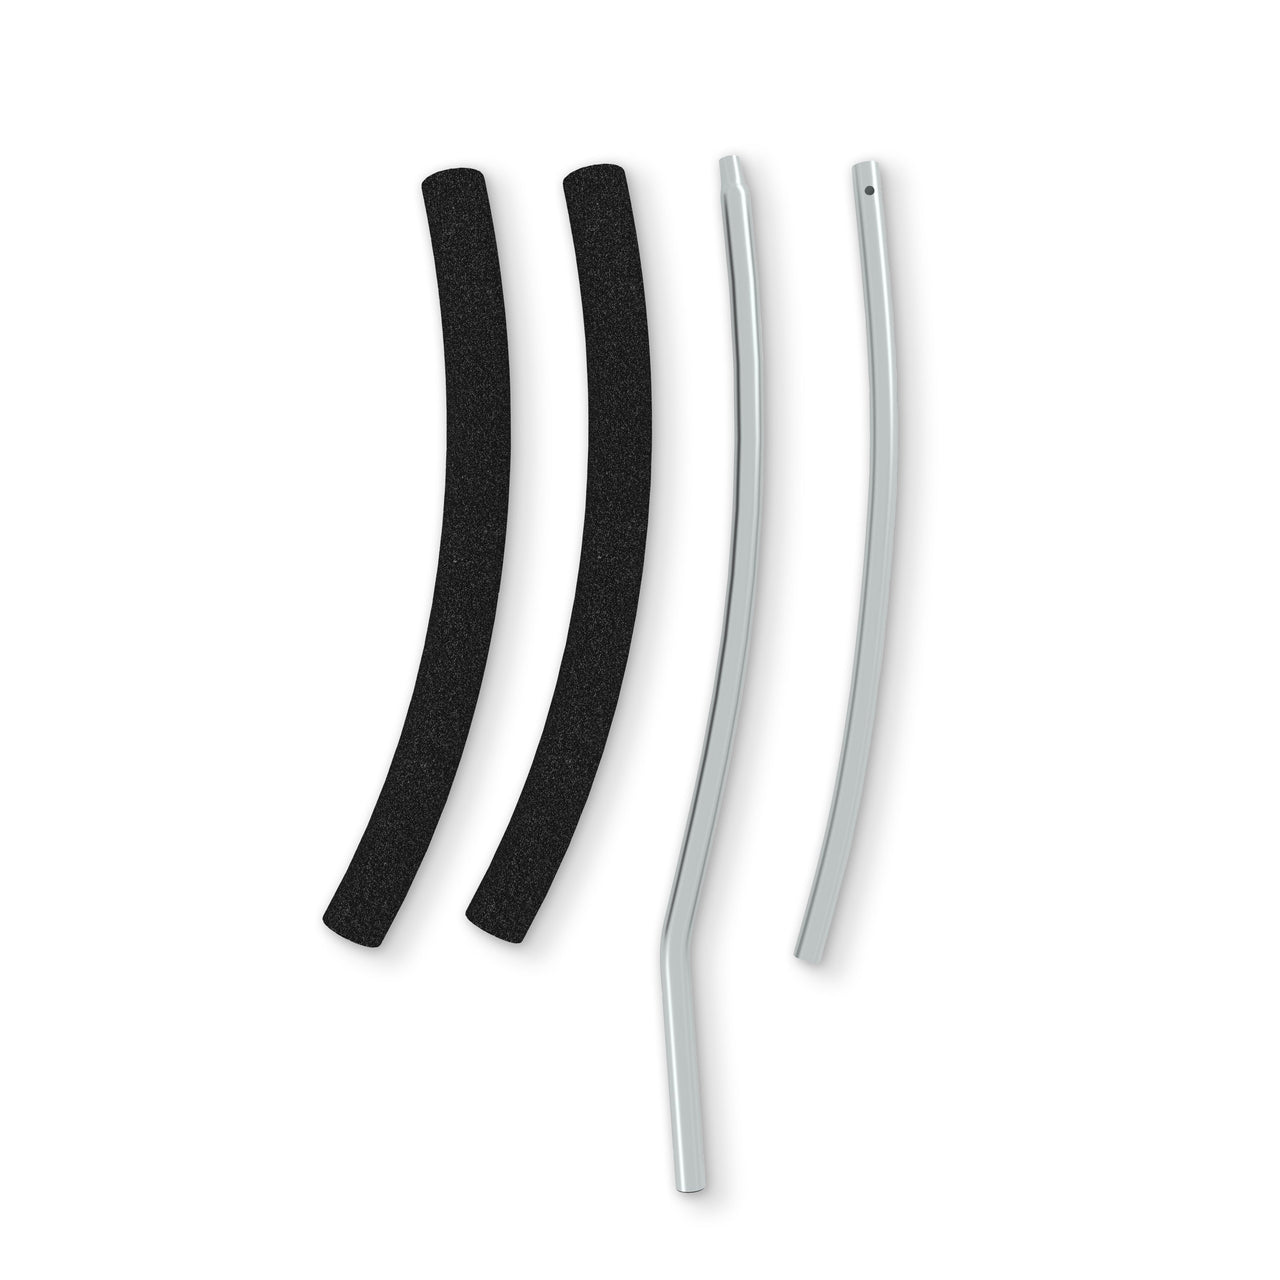 Parts for 8FT Jumpzylla Curved Pole Trampolines, 8FT